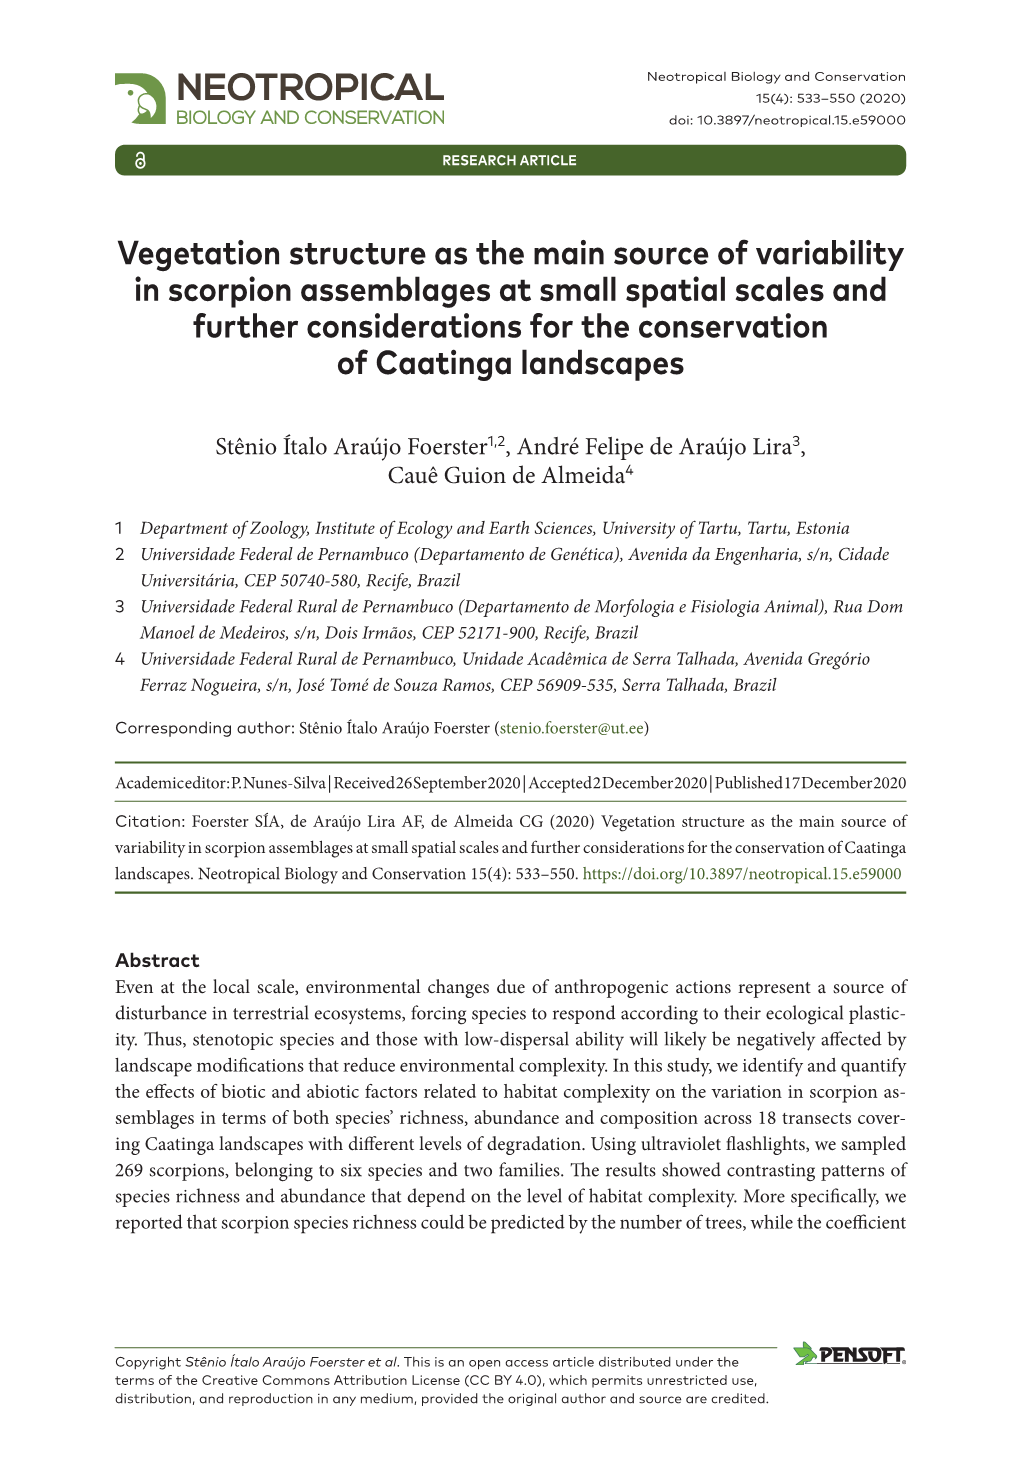 Vegetation Structure As the Main Source of Variability in Scorpion Assemblages at Small Spatial Scales and Further Considerat